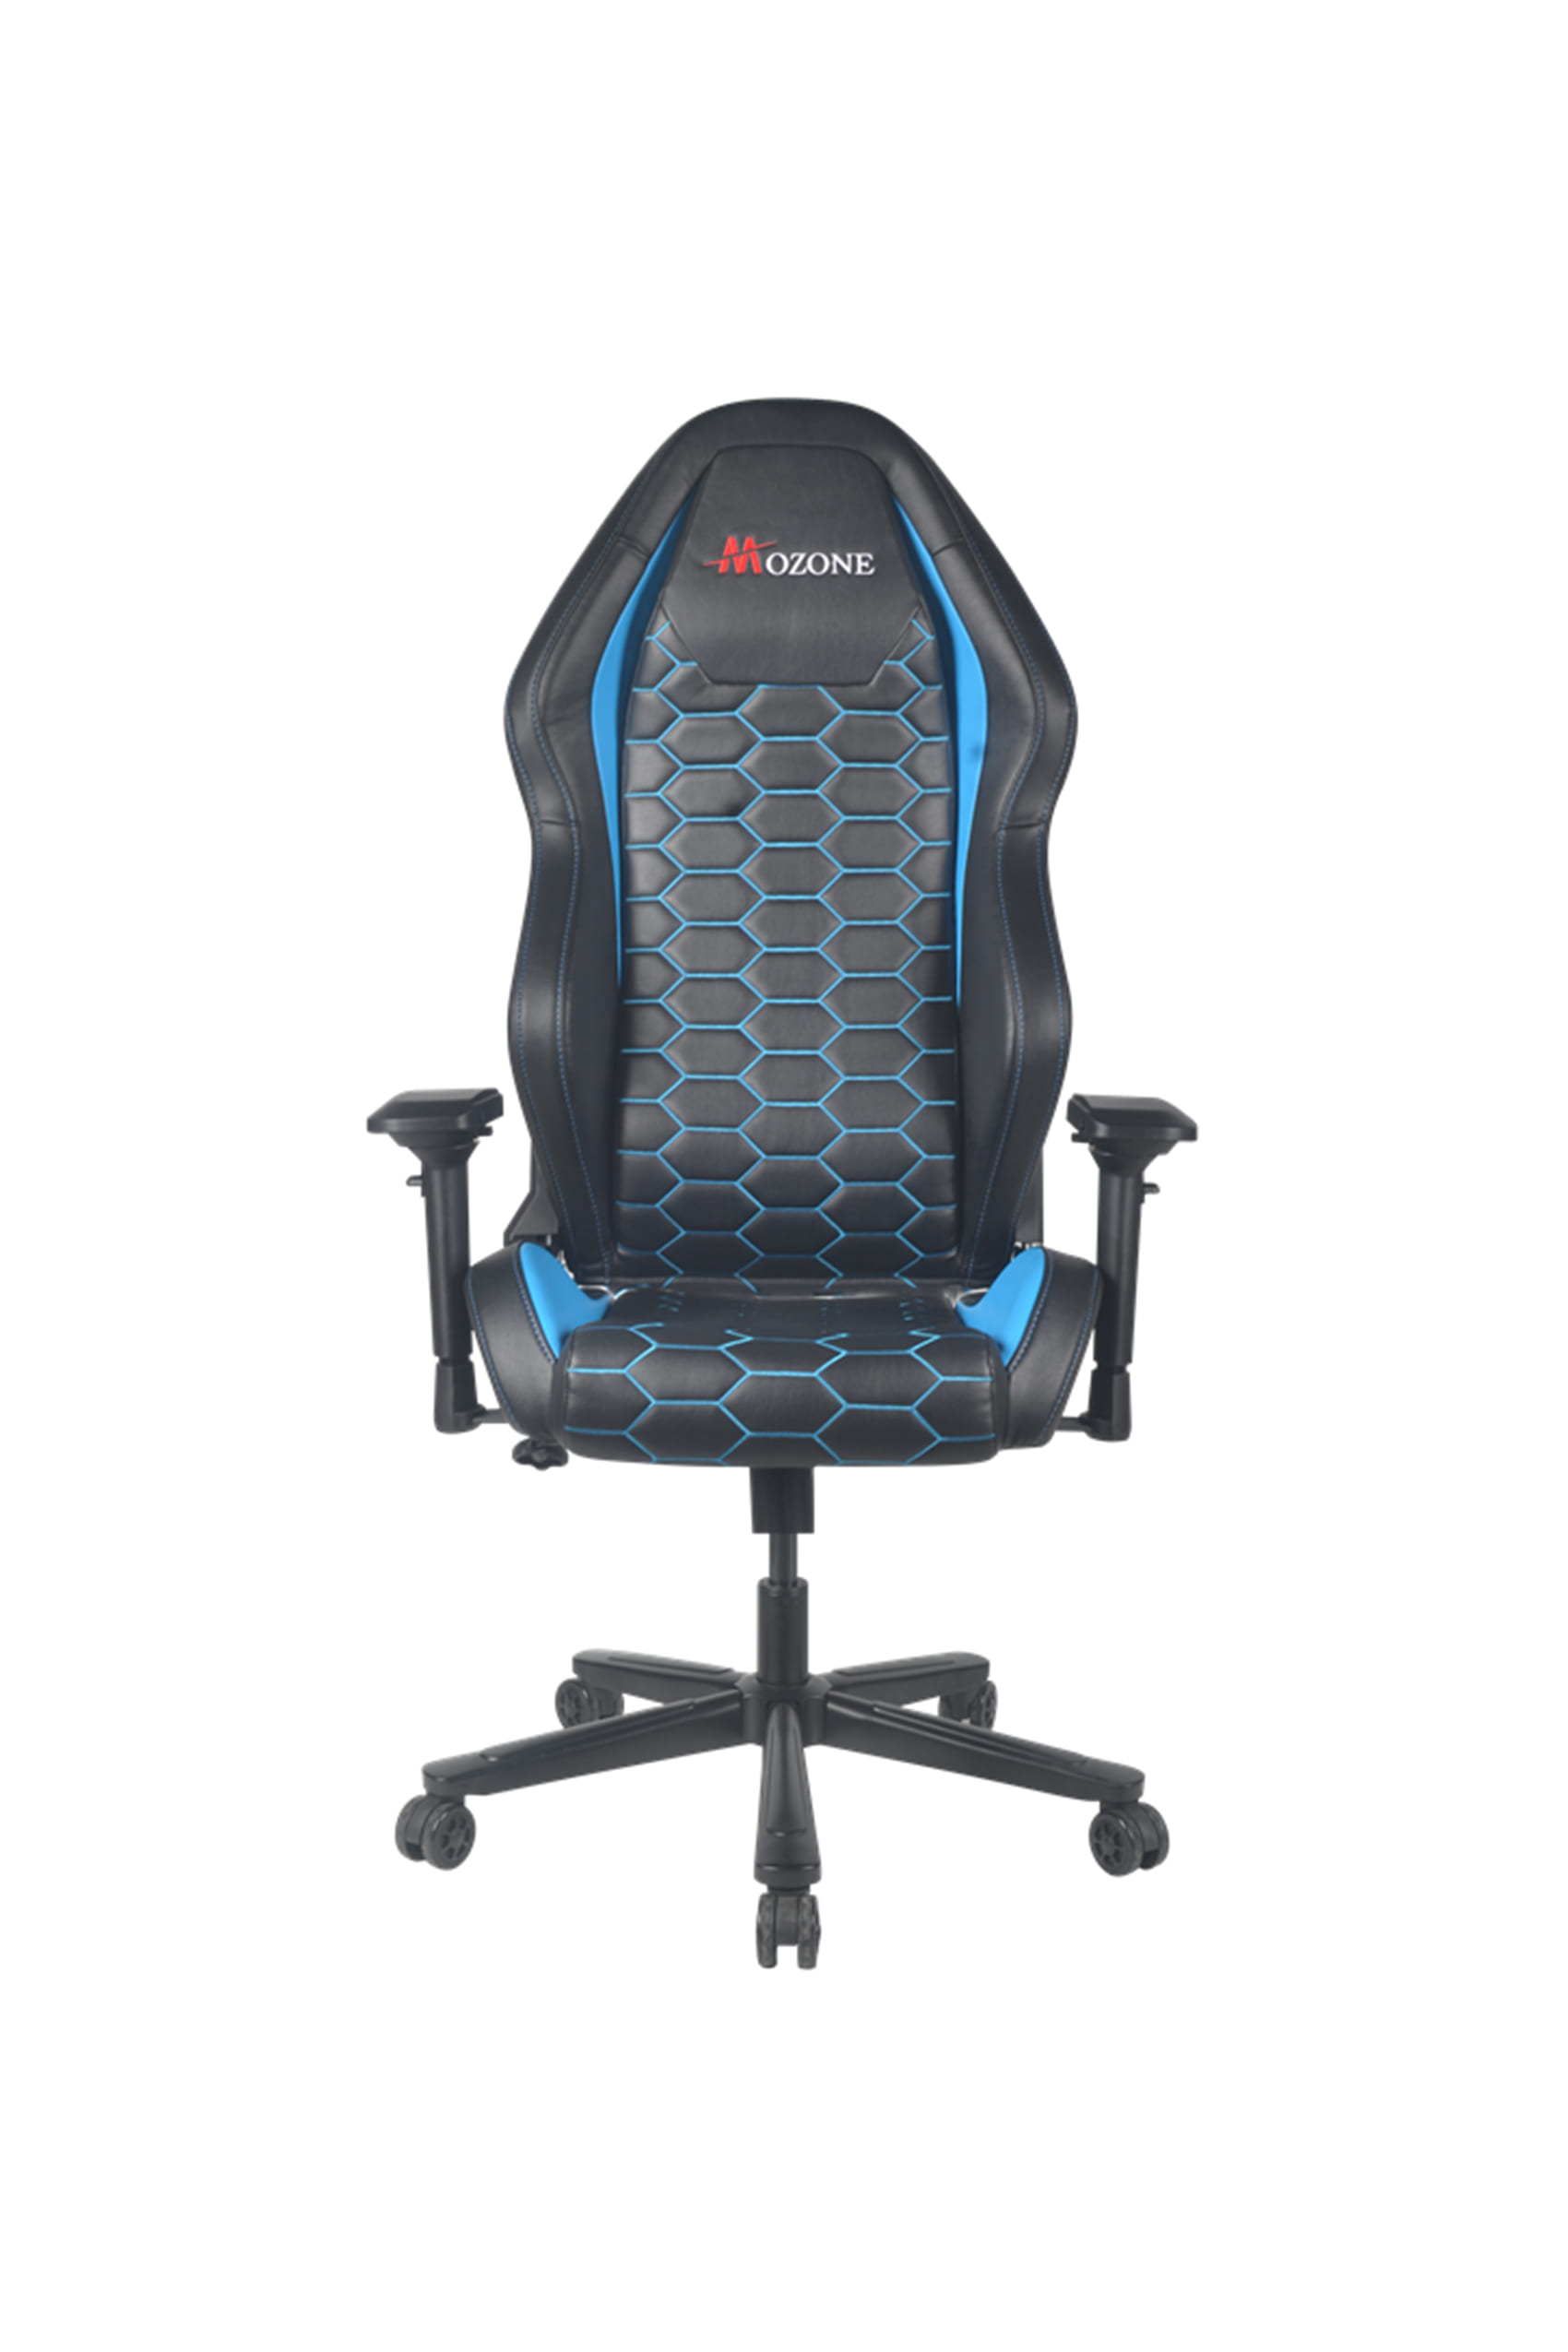 Mozone Serpent Gaming Chair